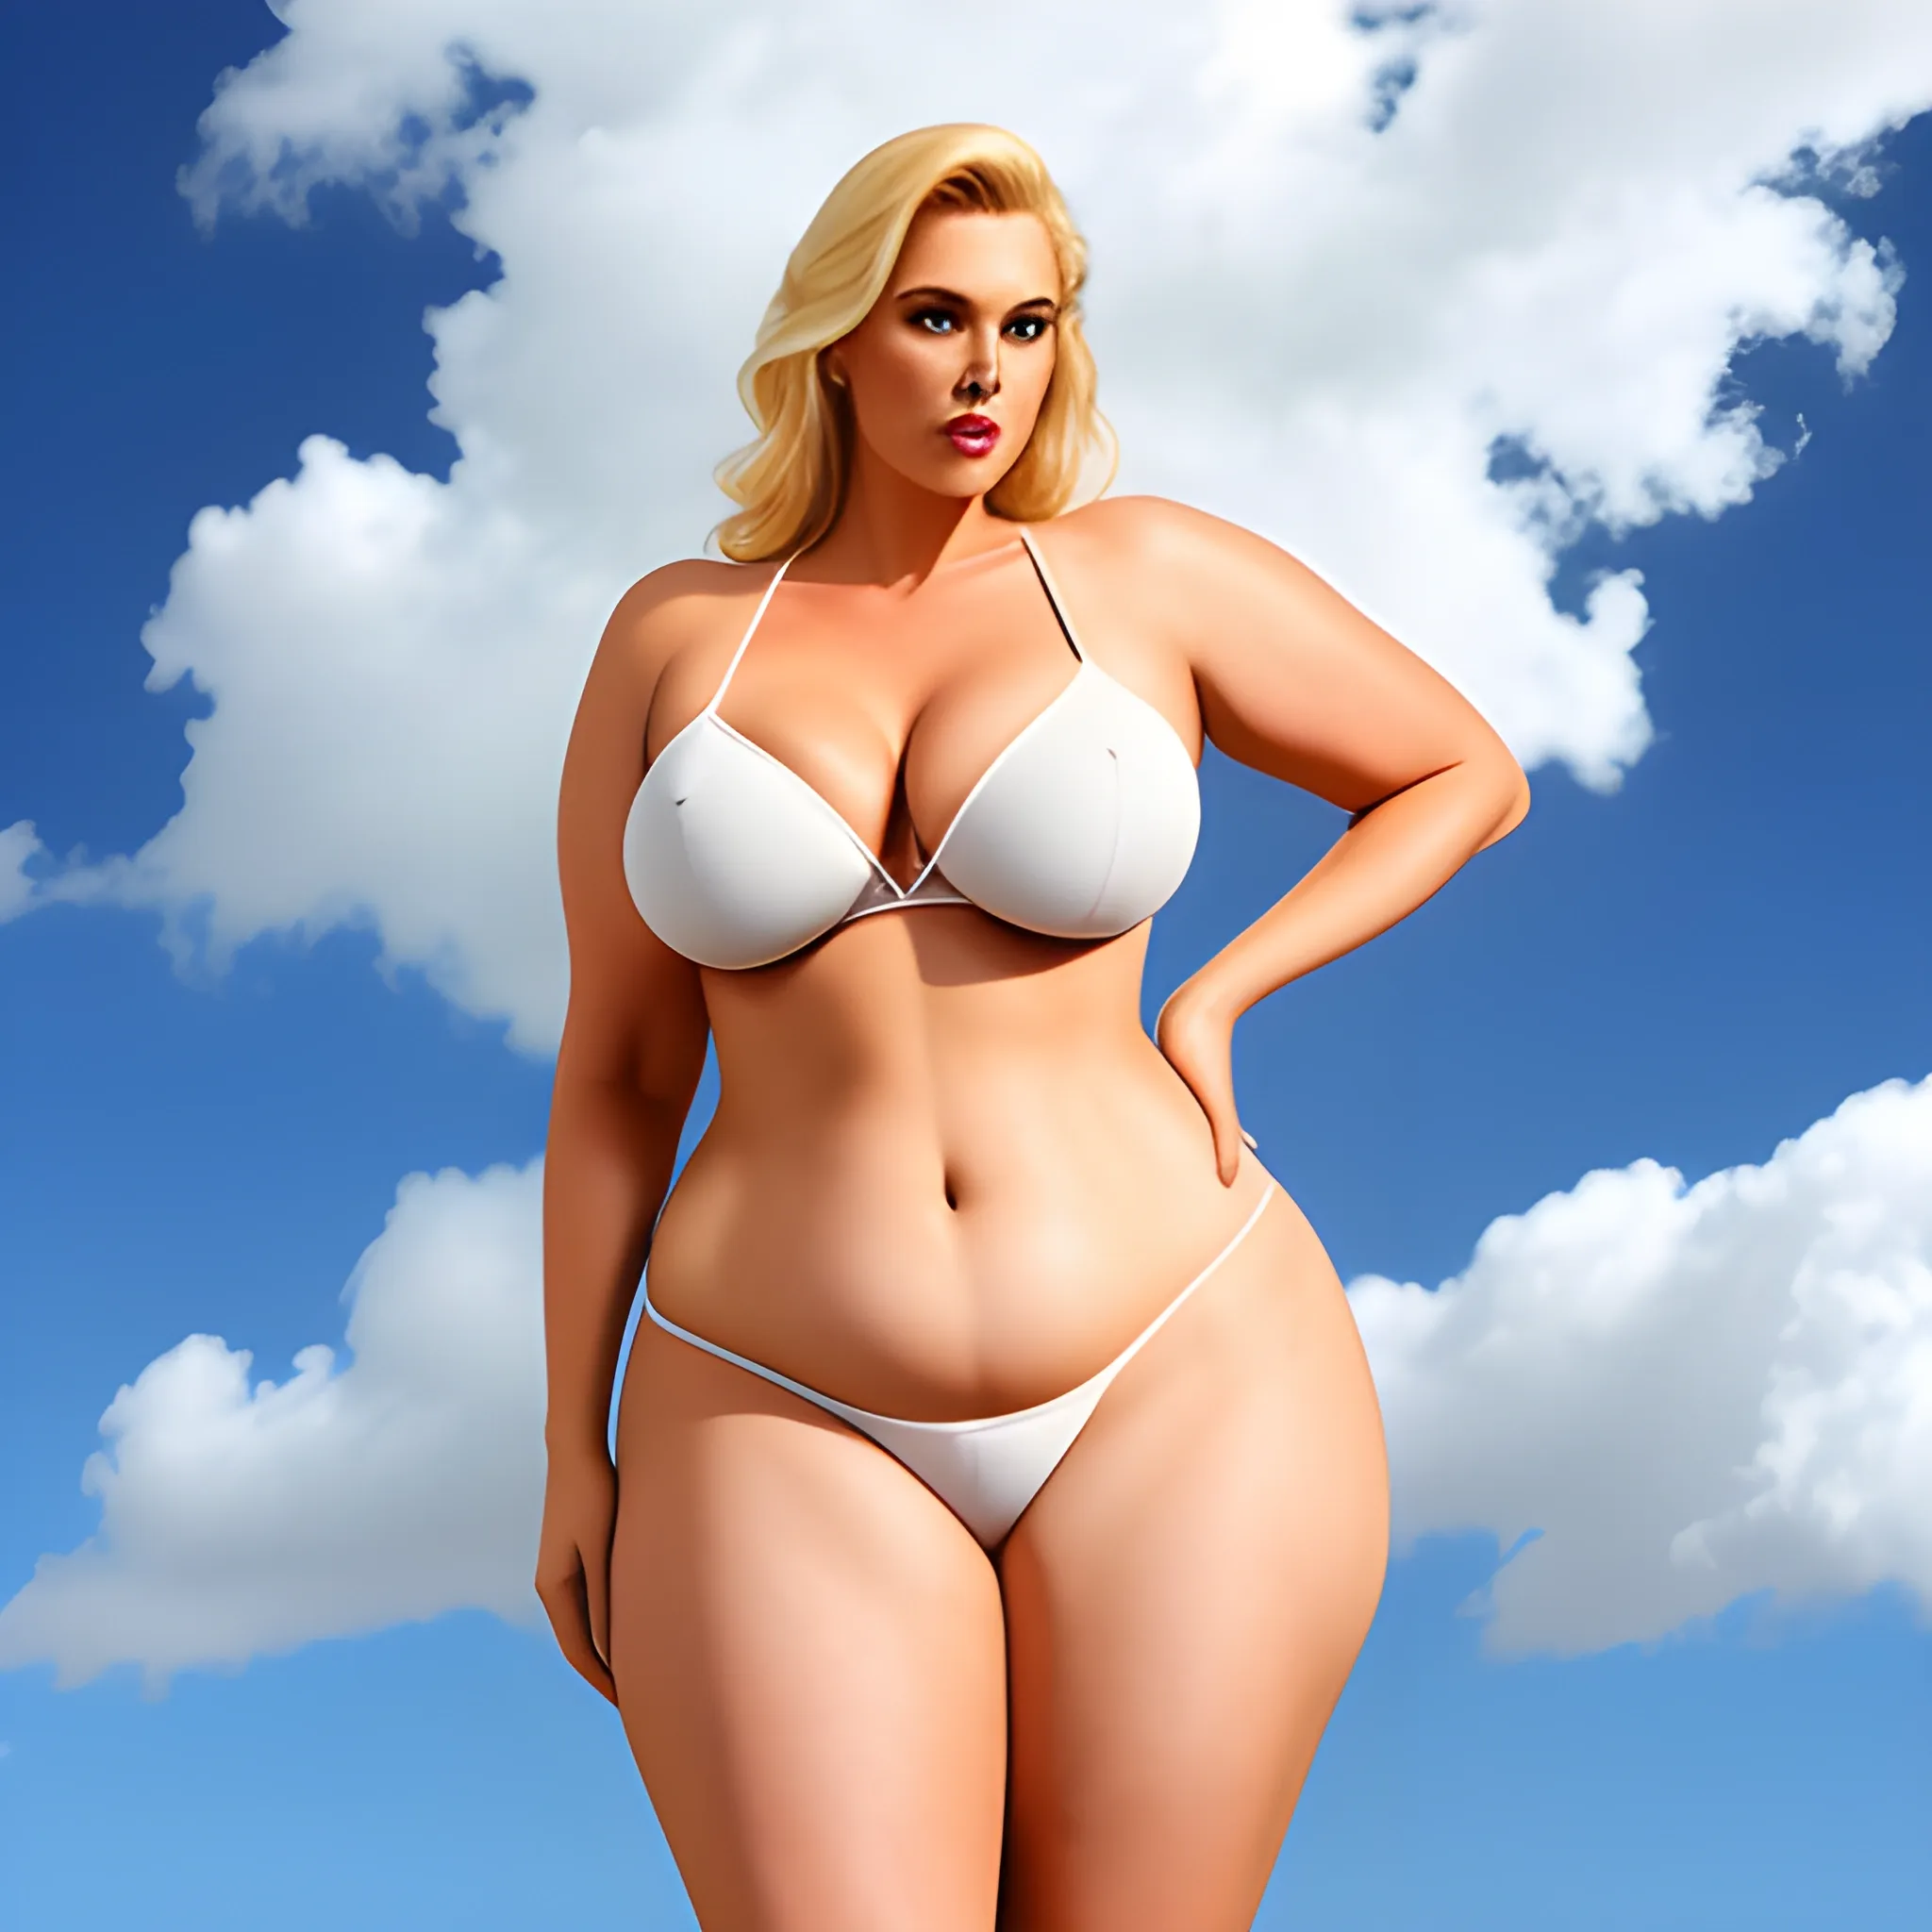 very tall robust curvy blonde girl standing under clouds 